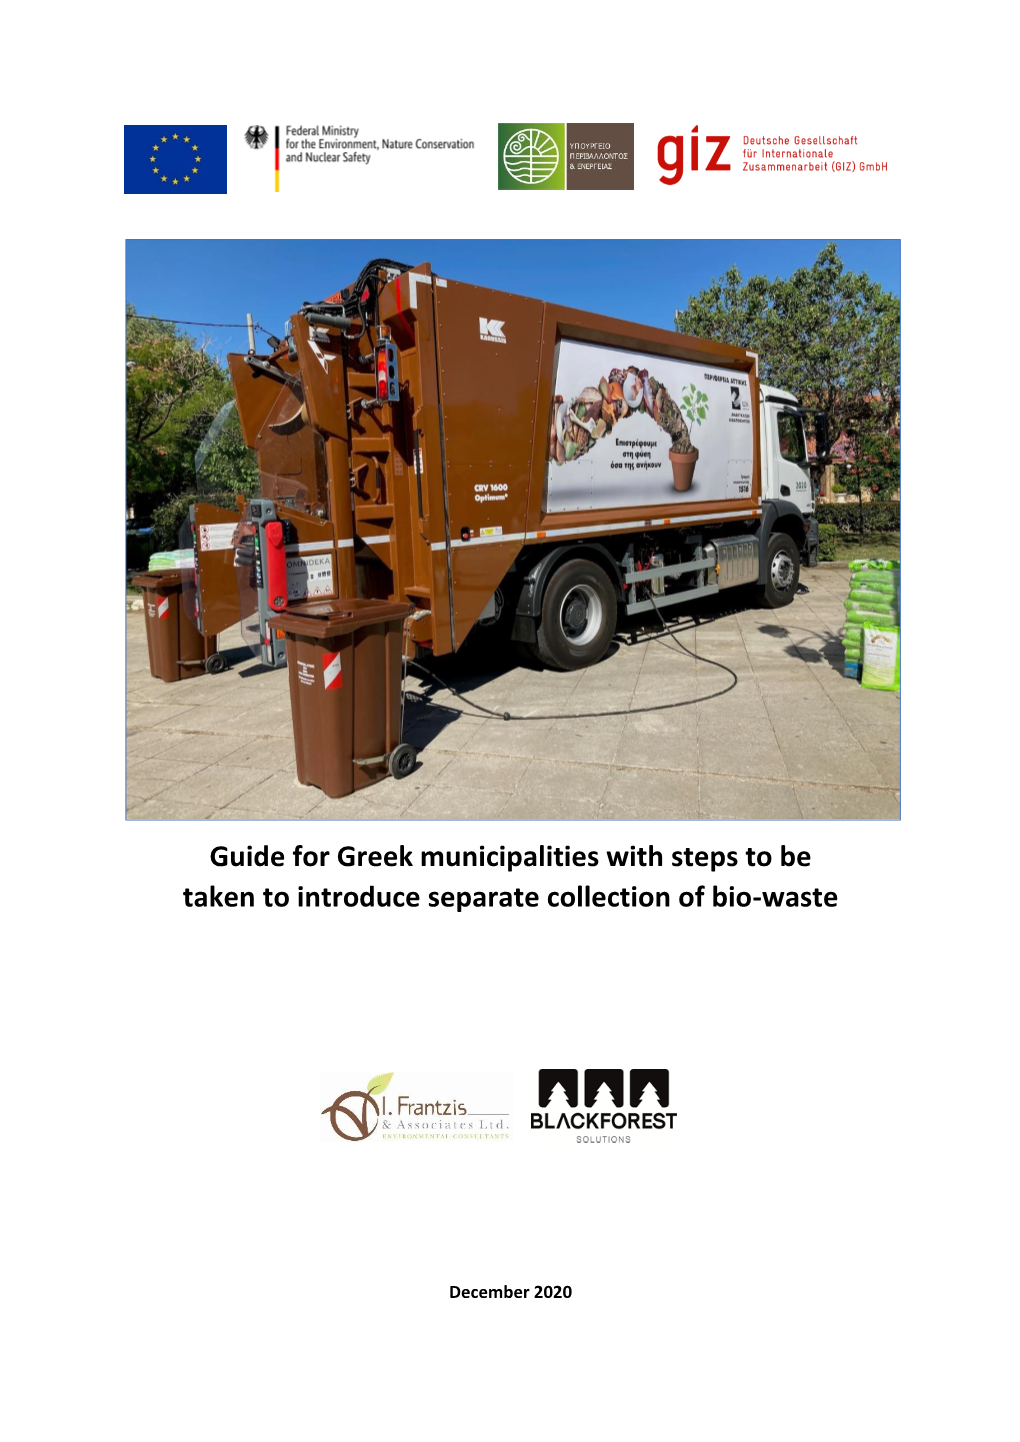 Guide for Greek Municipalities with Steps to Be Taken to Introduce Separate Collection of Bio-Waste